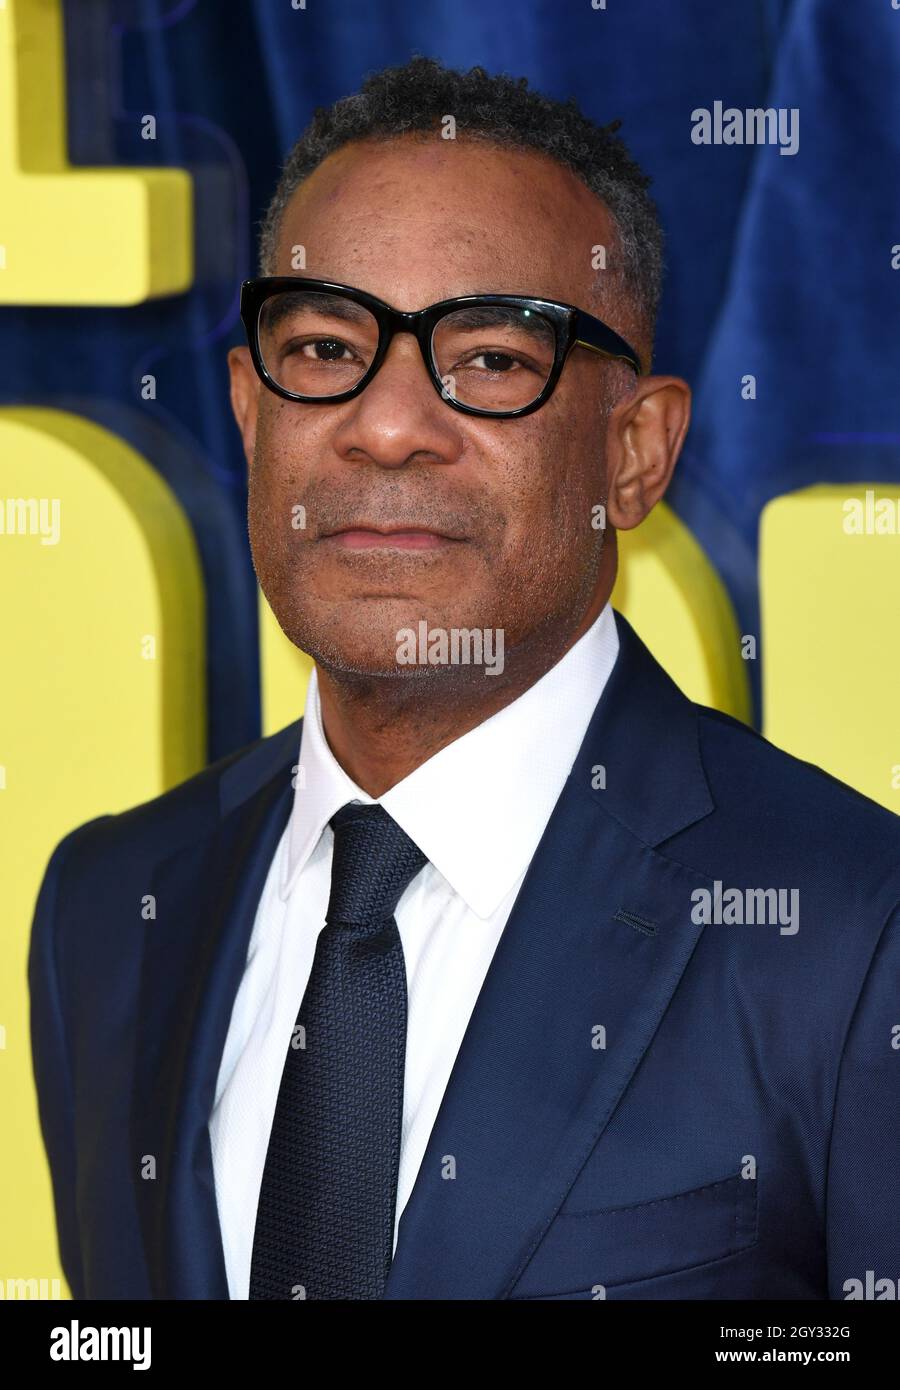 London, UK. October 6th, 2021, London, UK James Lassiter arriving at The Harder They Fall World Premiere, the opening night film of the BFI London Film Festival, held at The Royal Festival Hall. Credit: Doug Peters/EMPICS/Alamy Live News Stock Photo